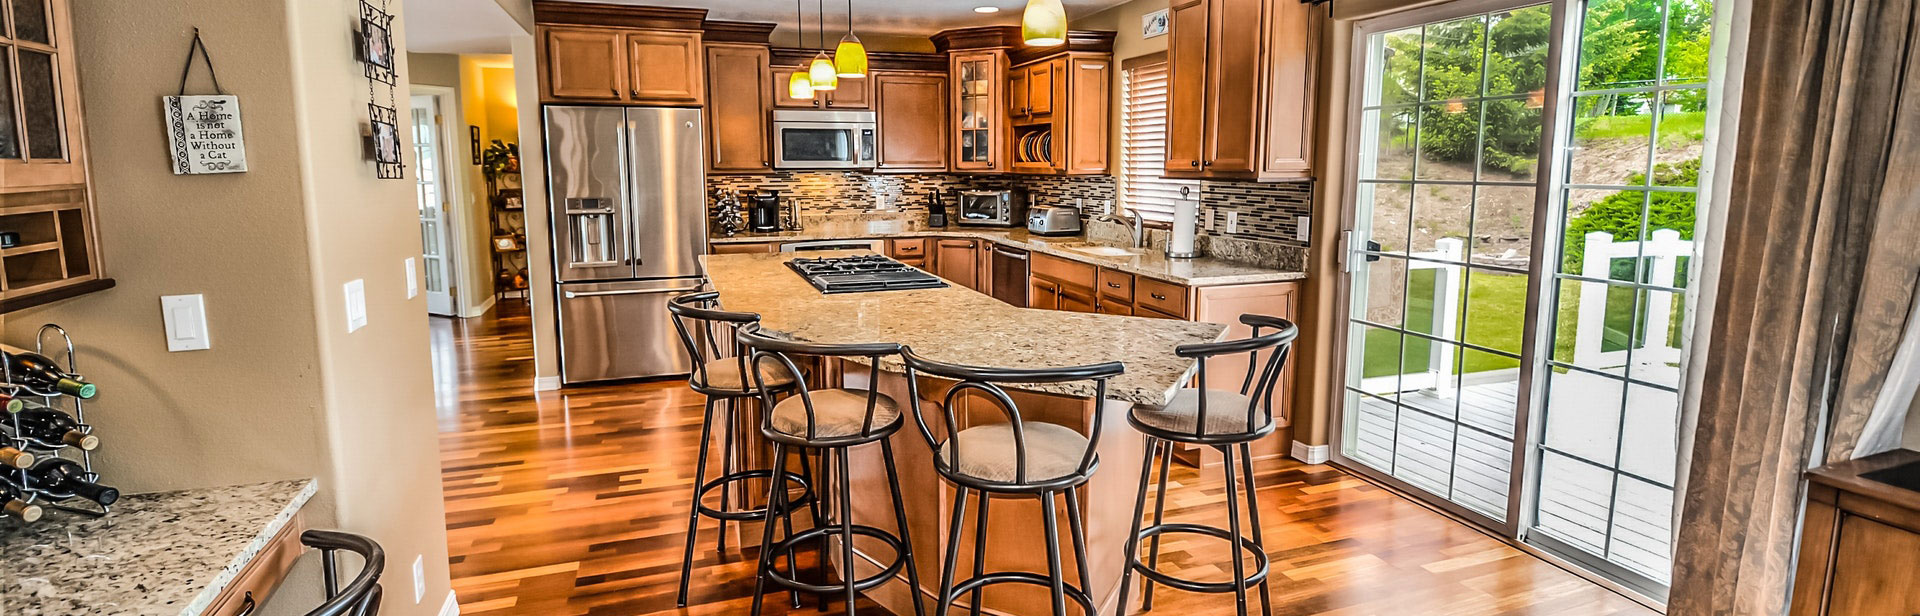 Modern Kitchen with Island and barstools